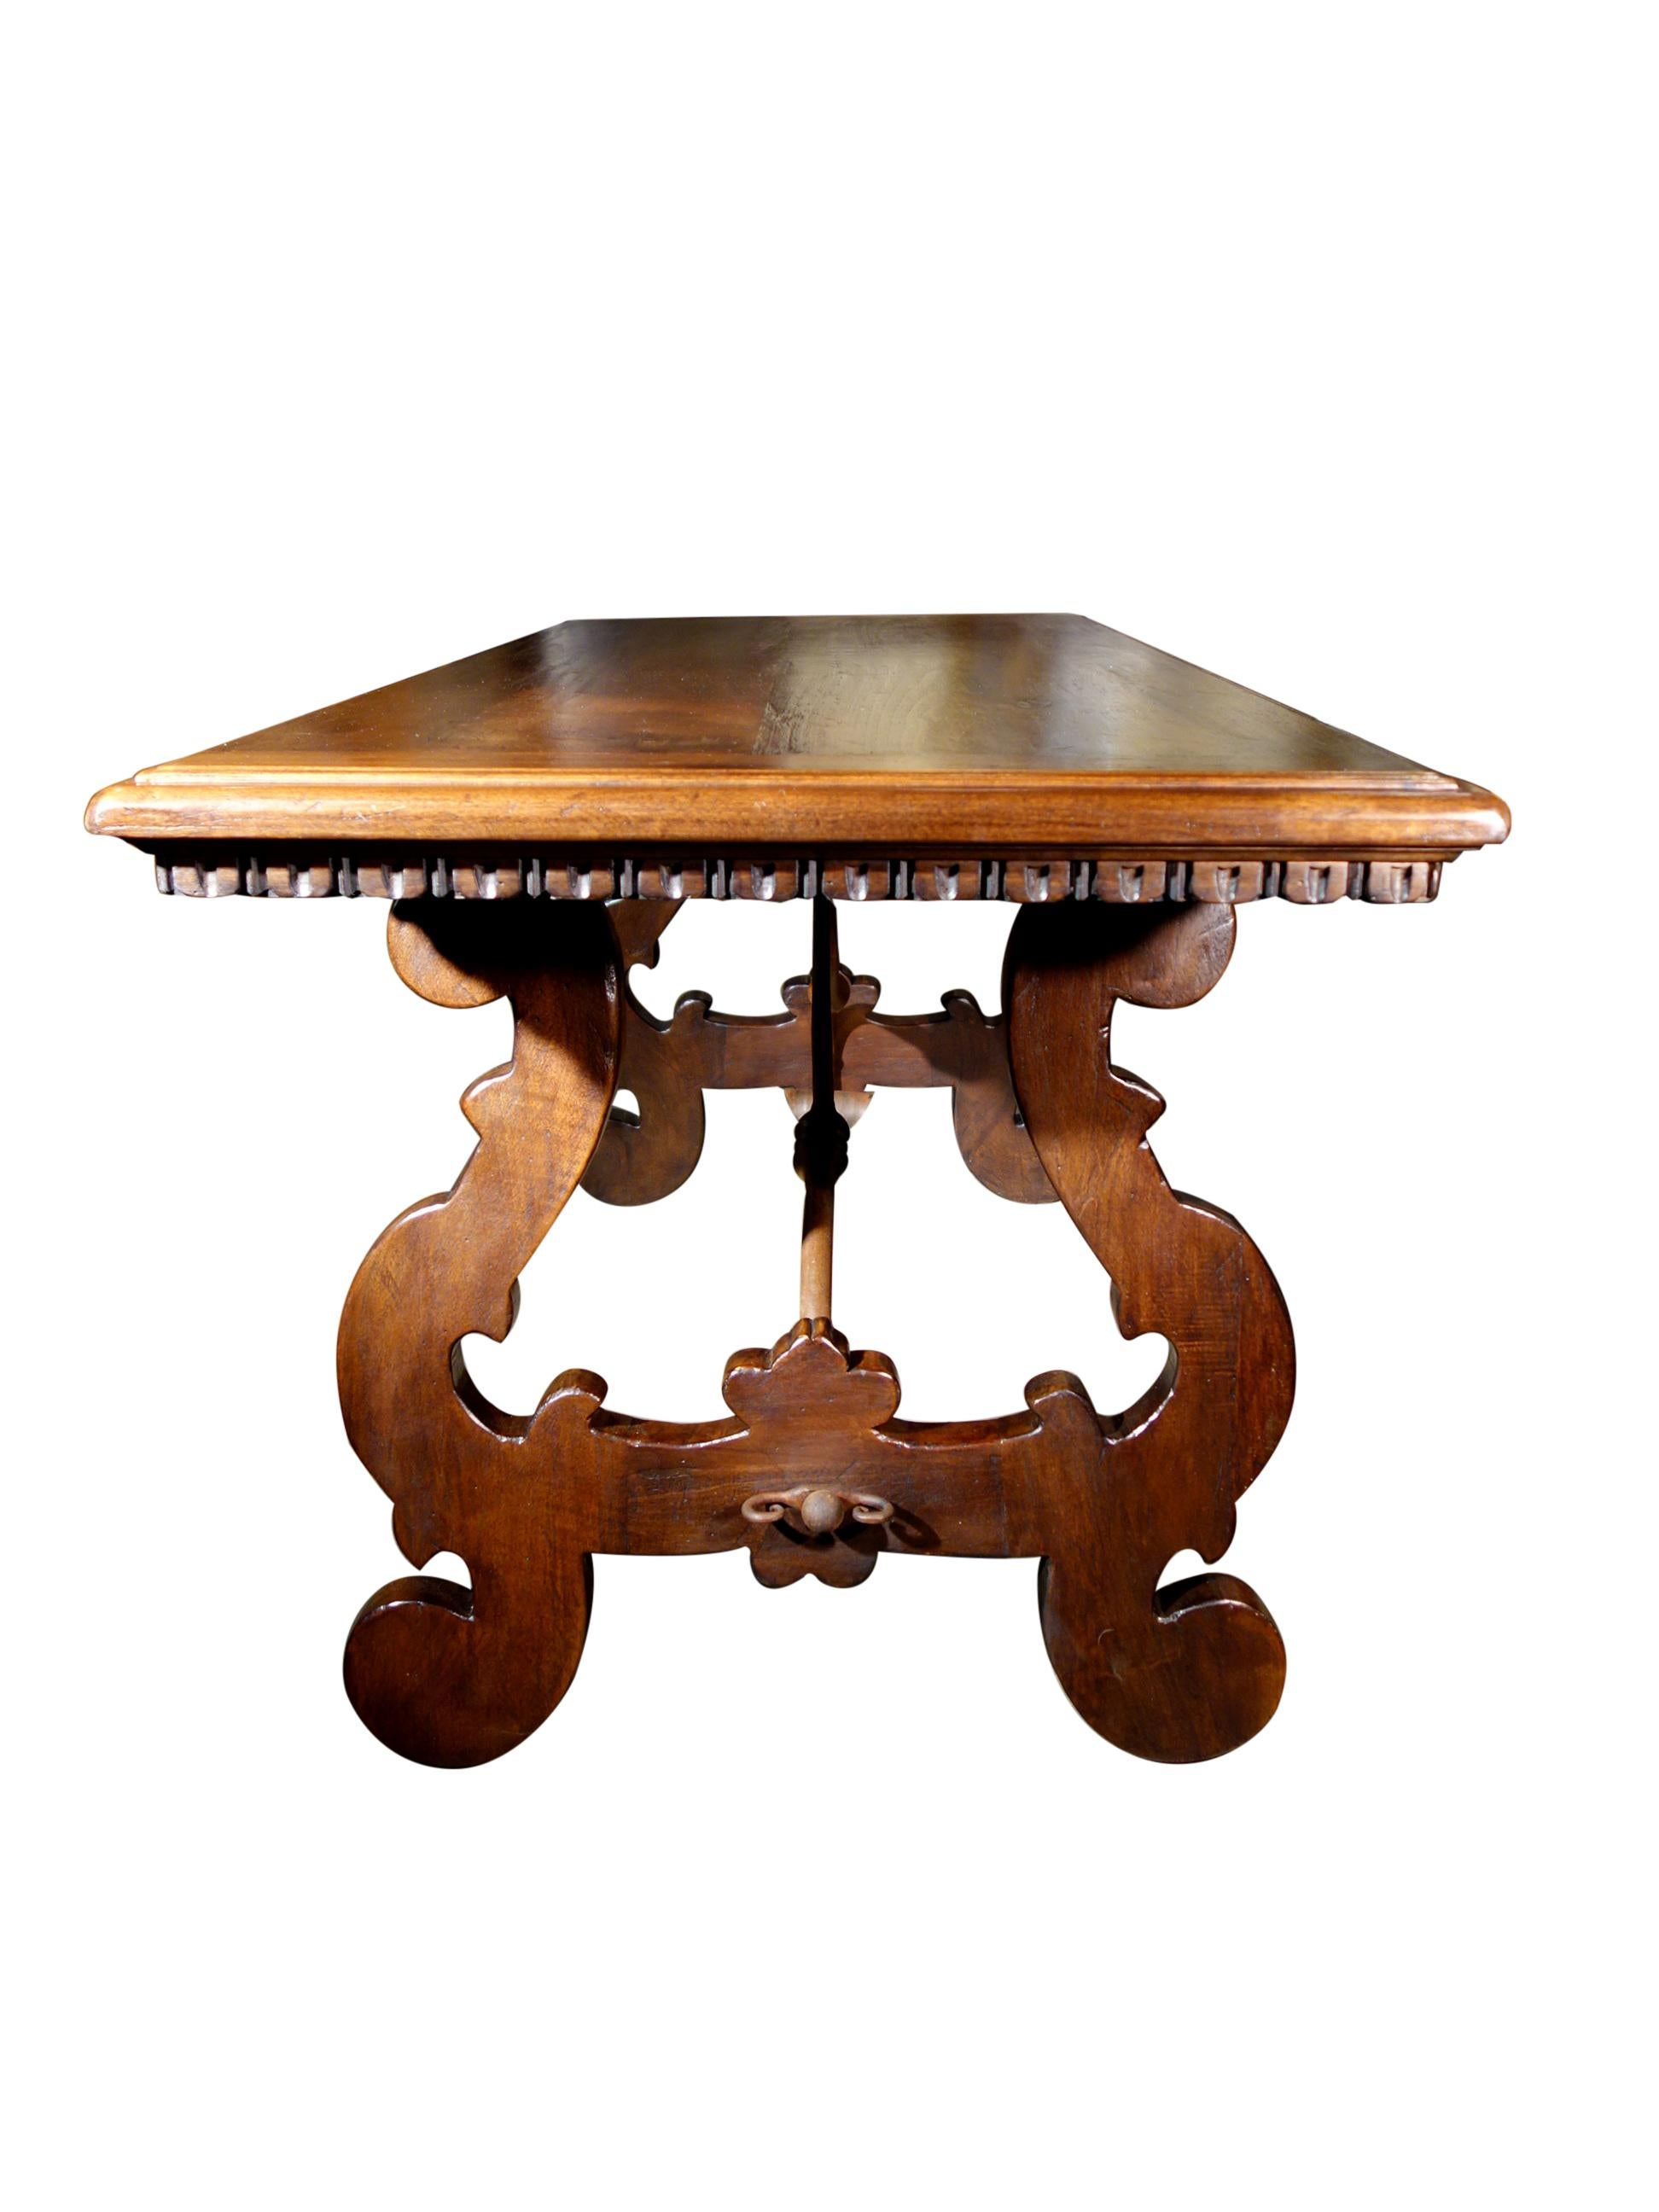 17th C Style Solid Italian Walnut Refectory Writing Dentil Edge Table options For Sale 6